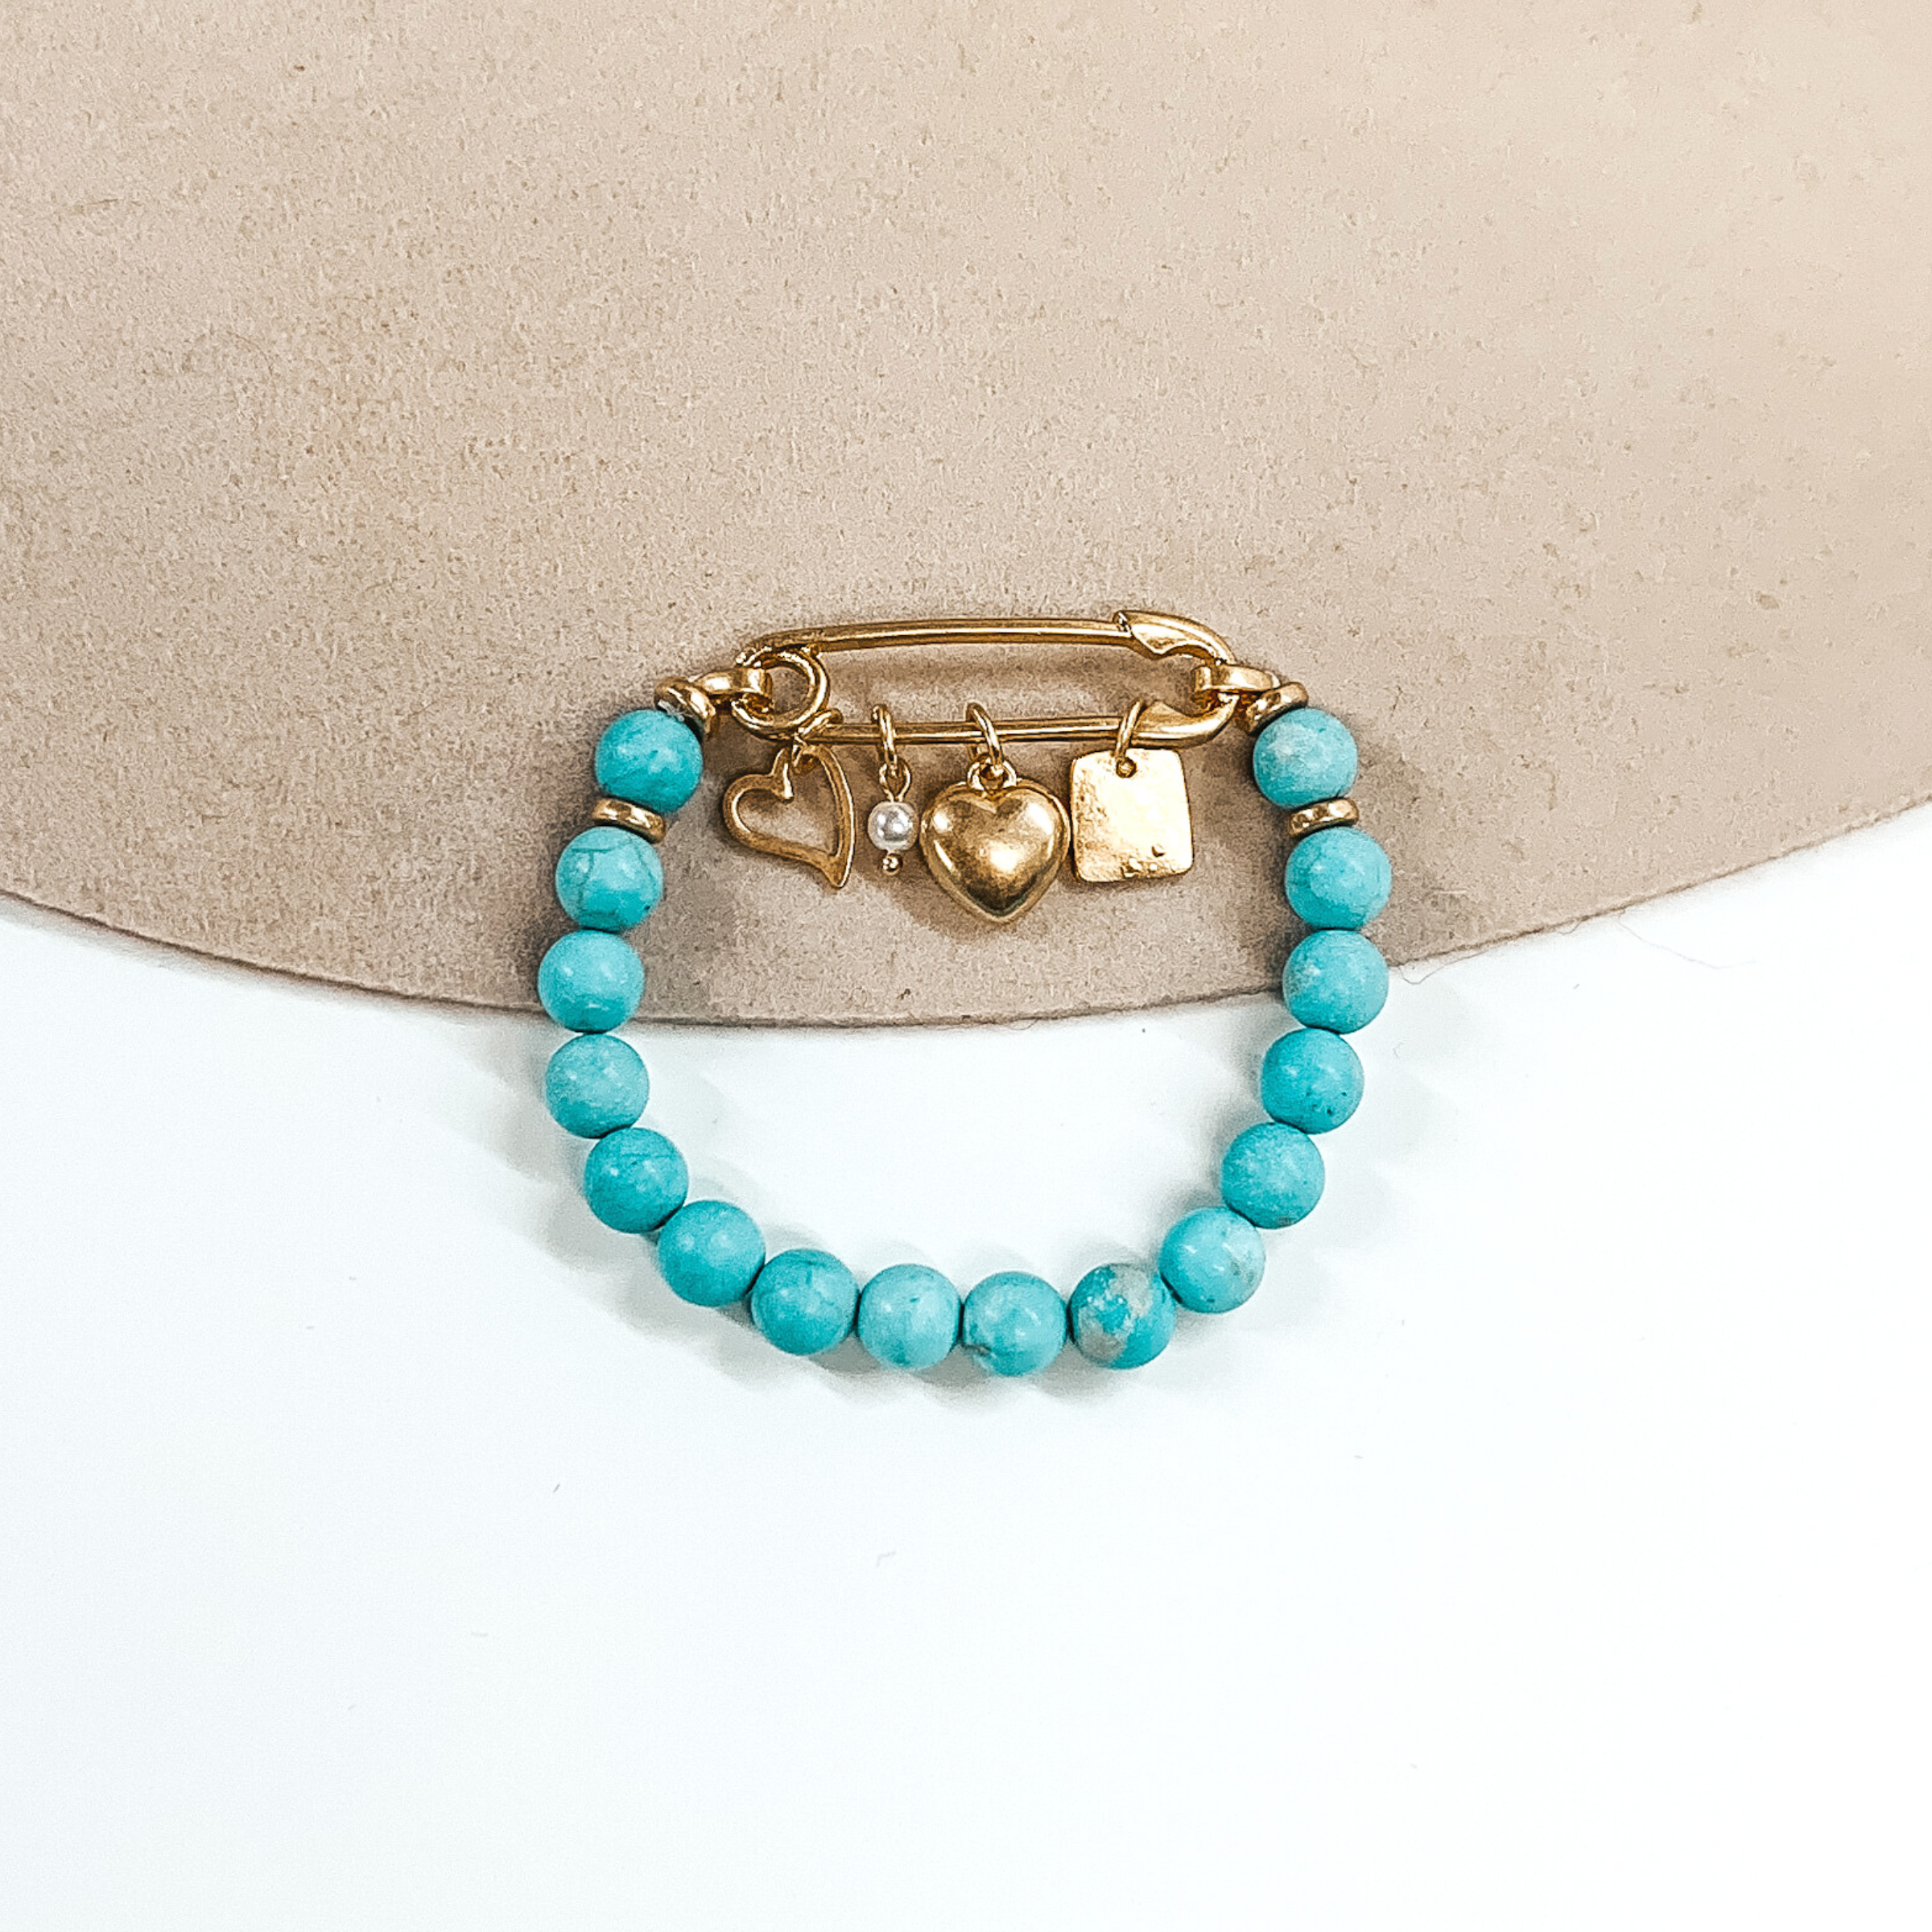 This is a turquoise beaded bracelet with a safety pin pendant closing the ends of the bracelet. Hanging on the gold safety pin are four gold charms including a square, a white pearl, a heart, and an outlined heart. This bracelet is pictured on a beige and white background.